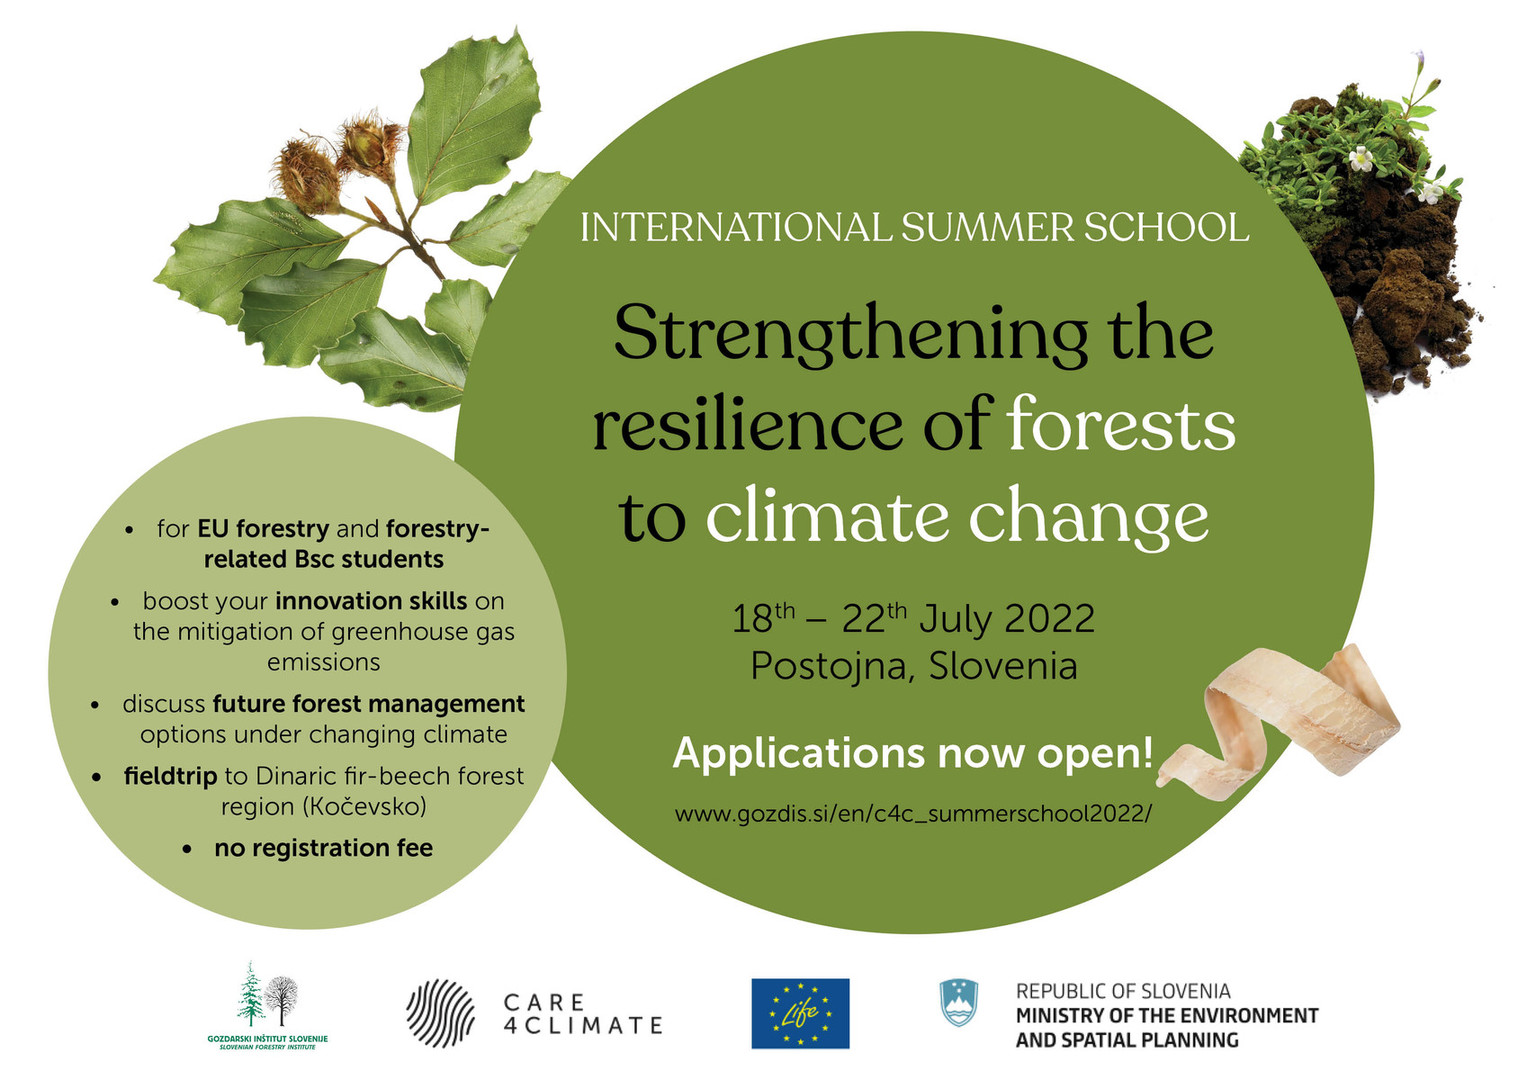 International forestry summer school "Strengthening the resilience of forests to climate change"